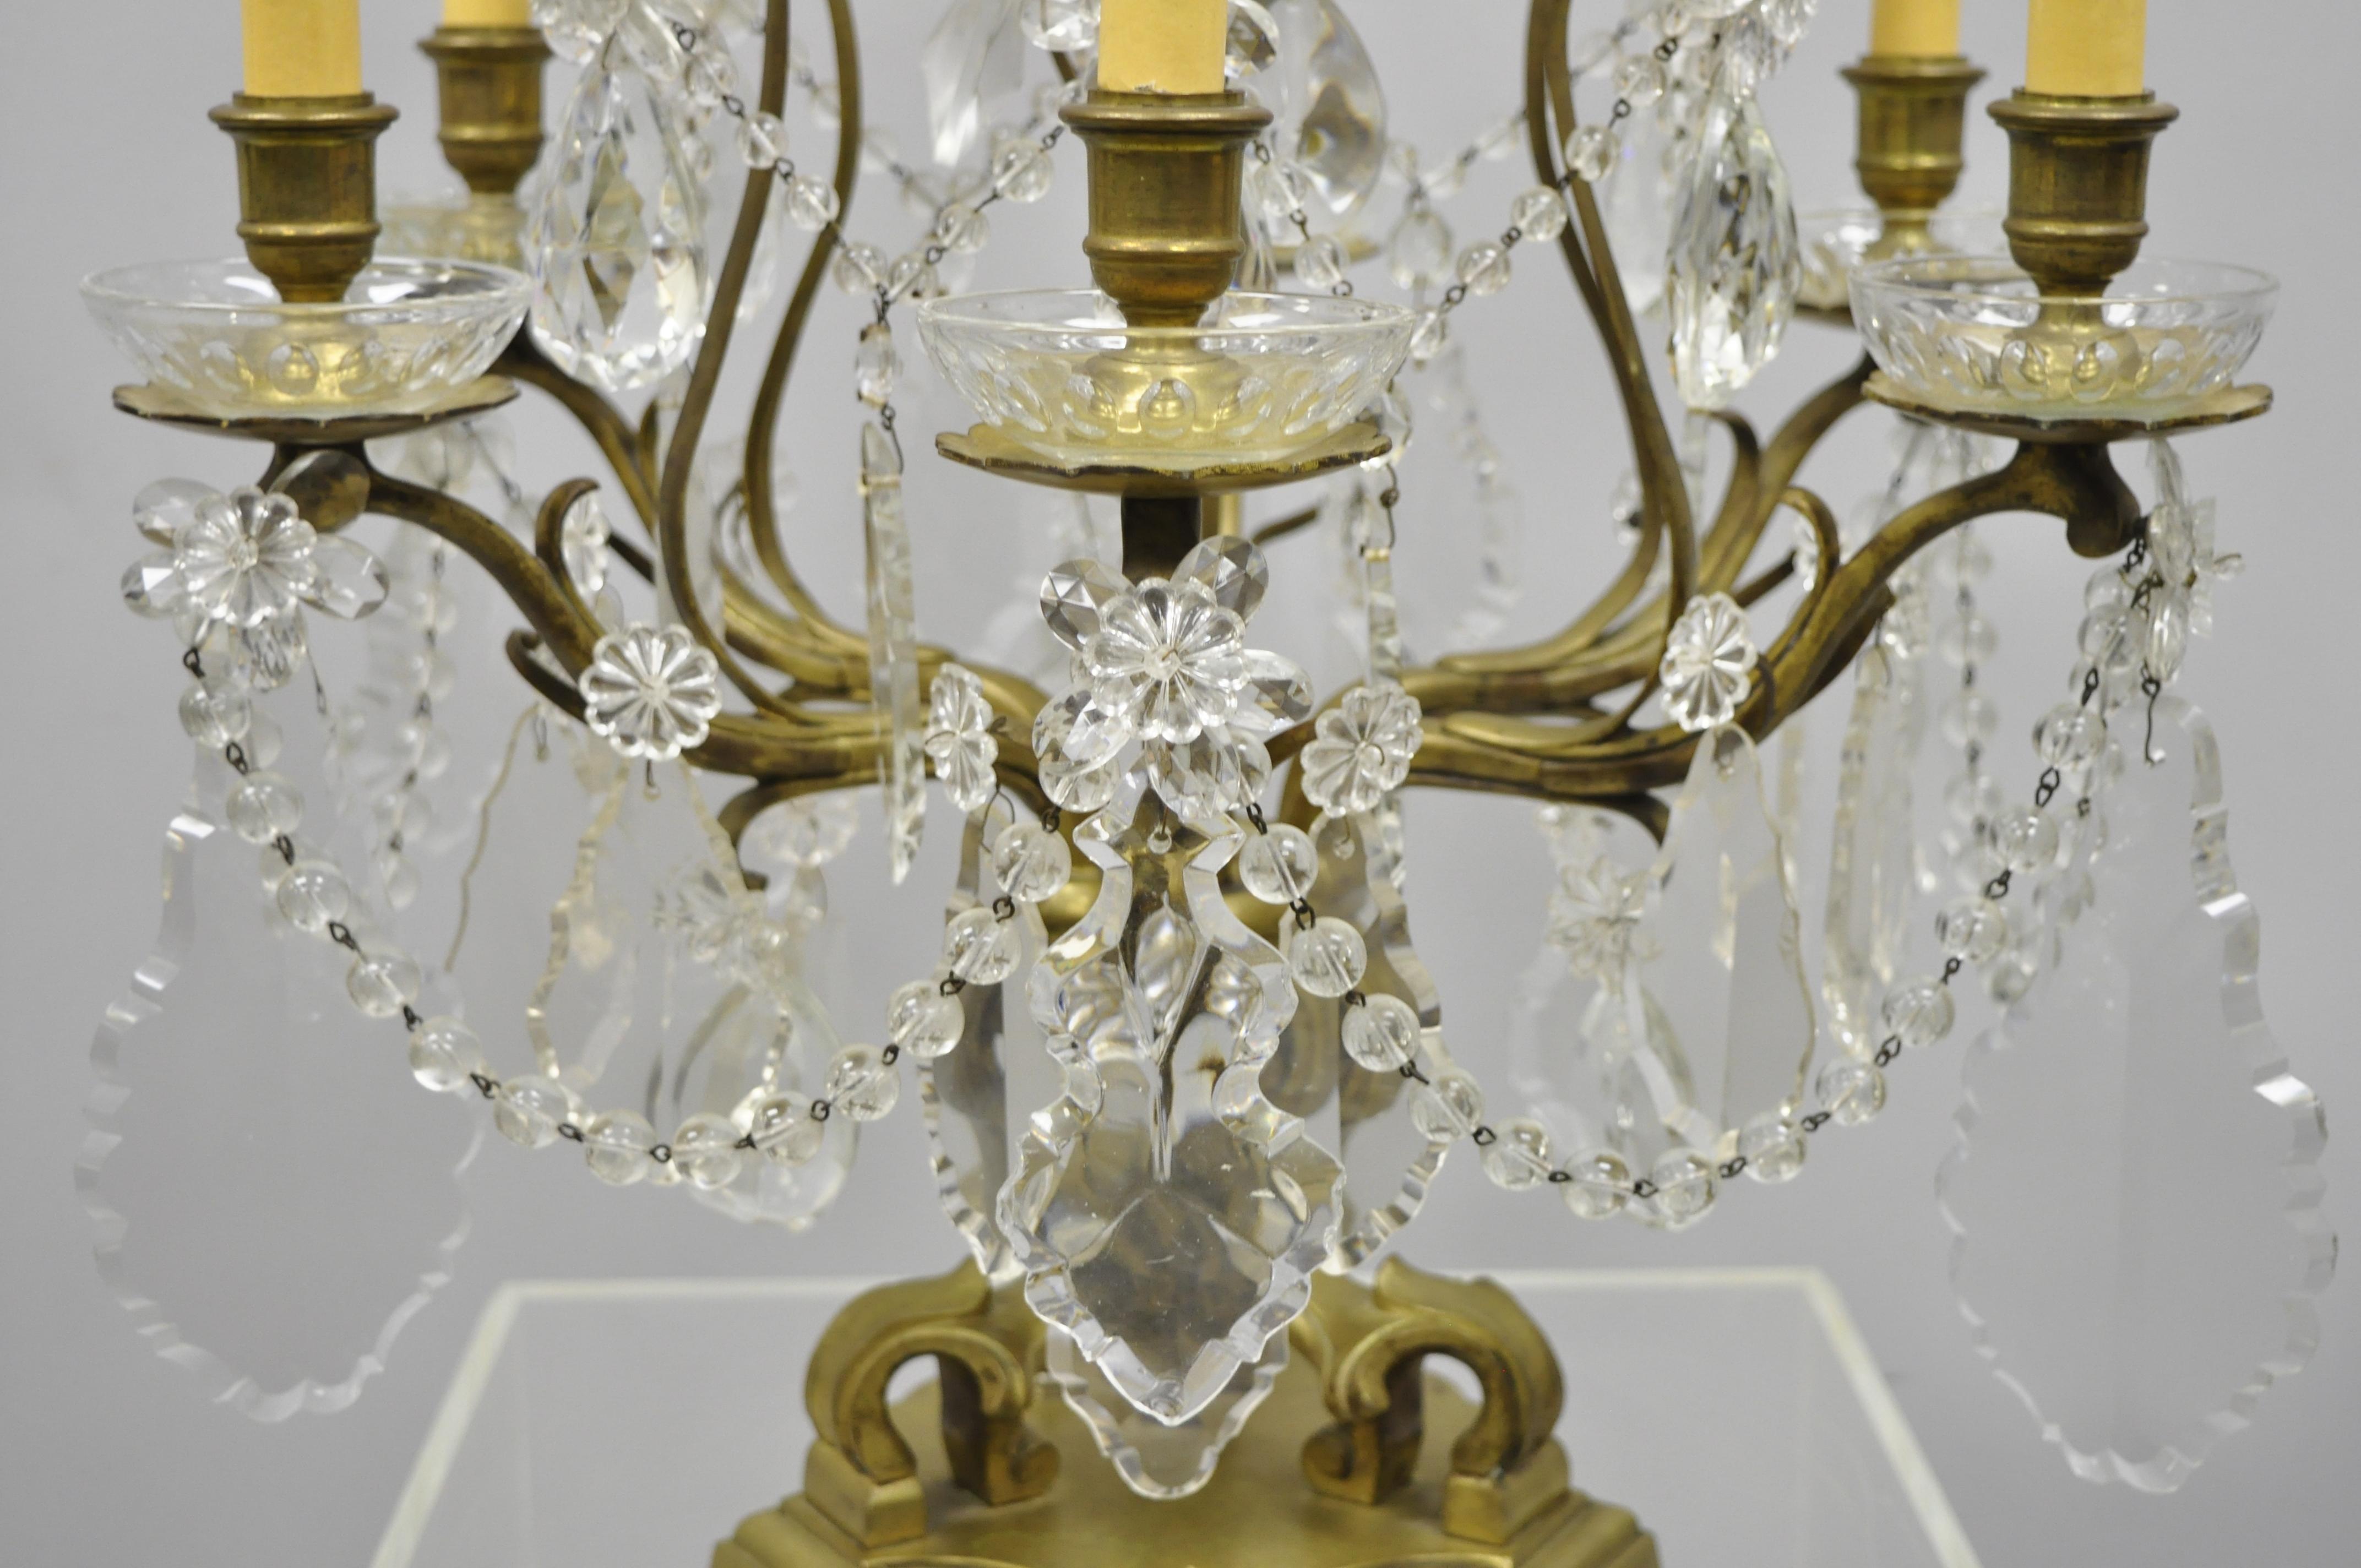 20th Century French Louis XVI Bronze and Crystal Prism Girandole Electrified Candelabra Lamp For Sale